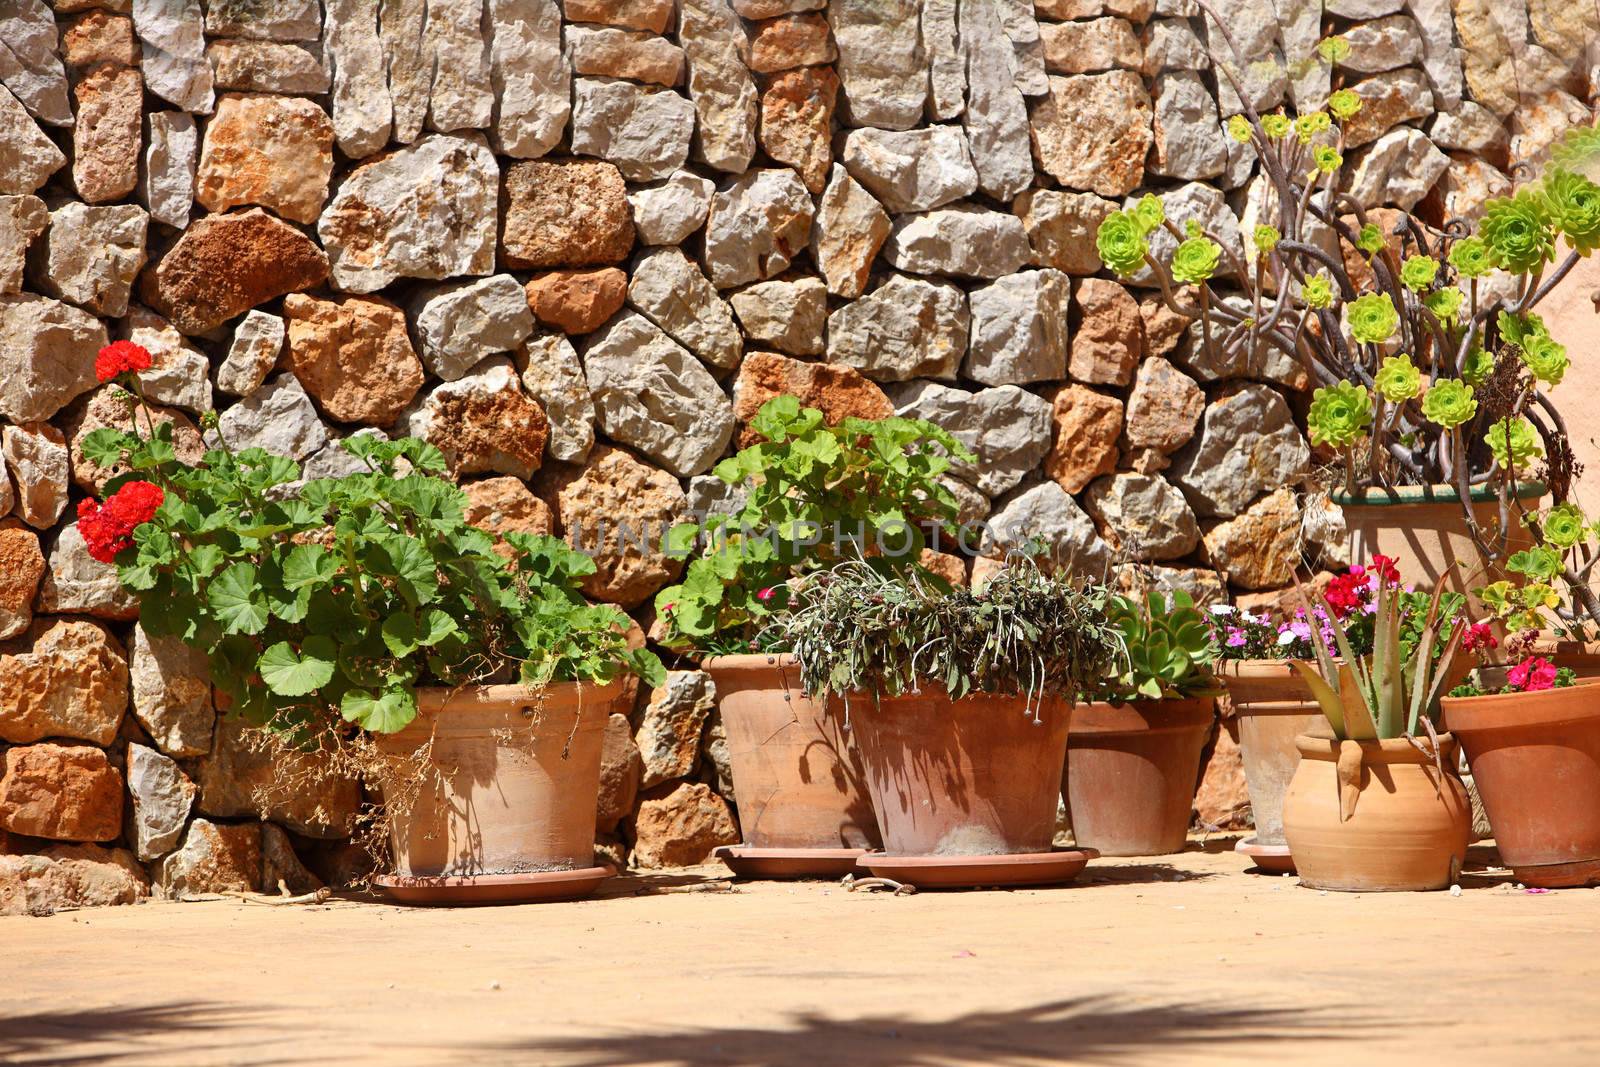 Potted plants with flowering geraniums and cacti lined up in front of a natural stone wall in the garden